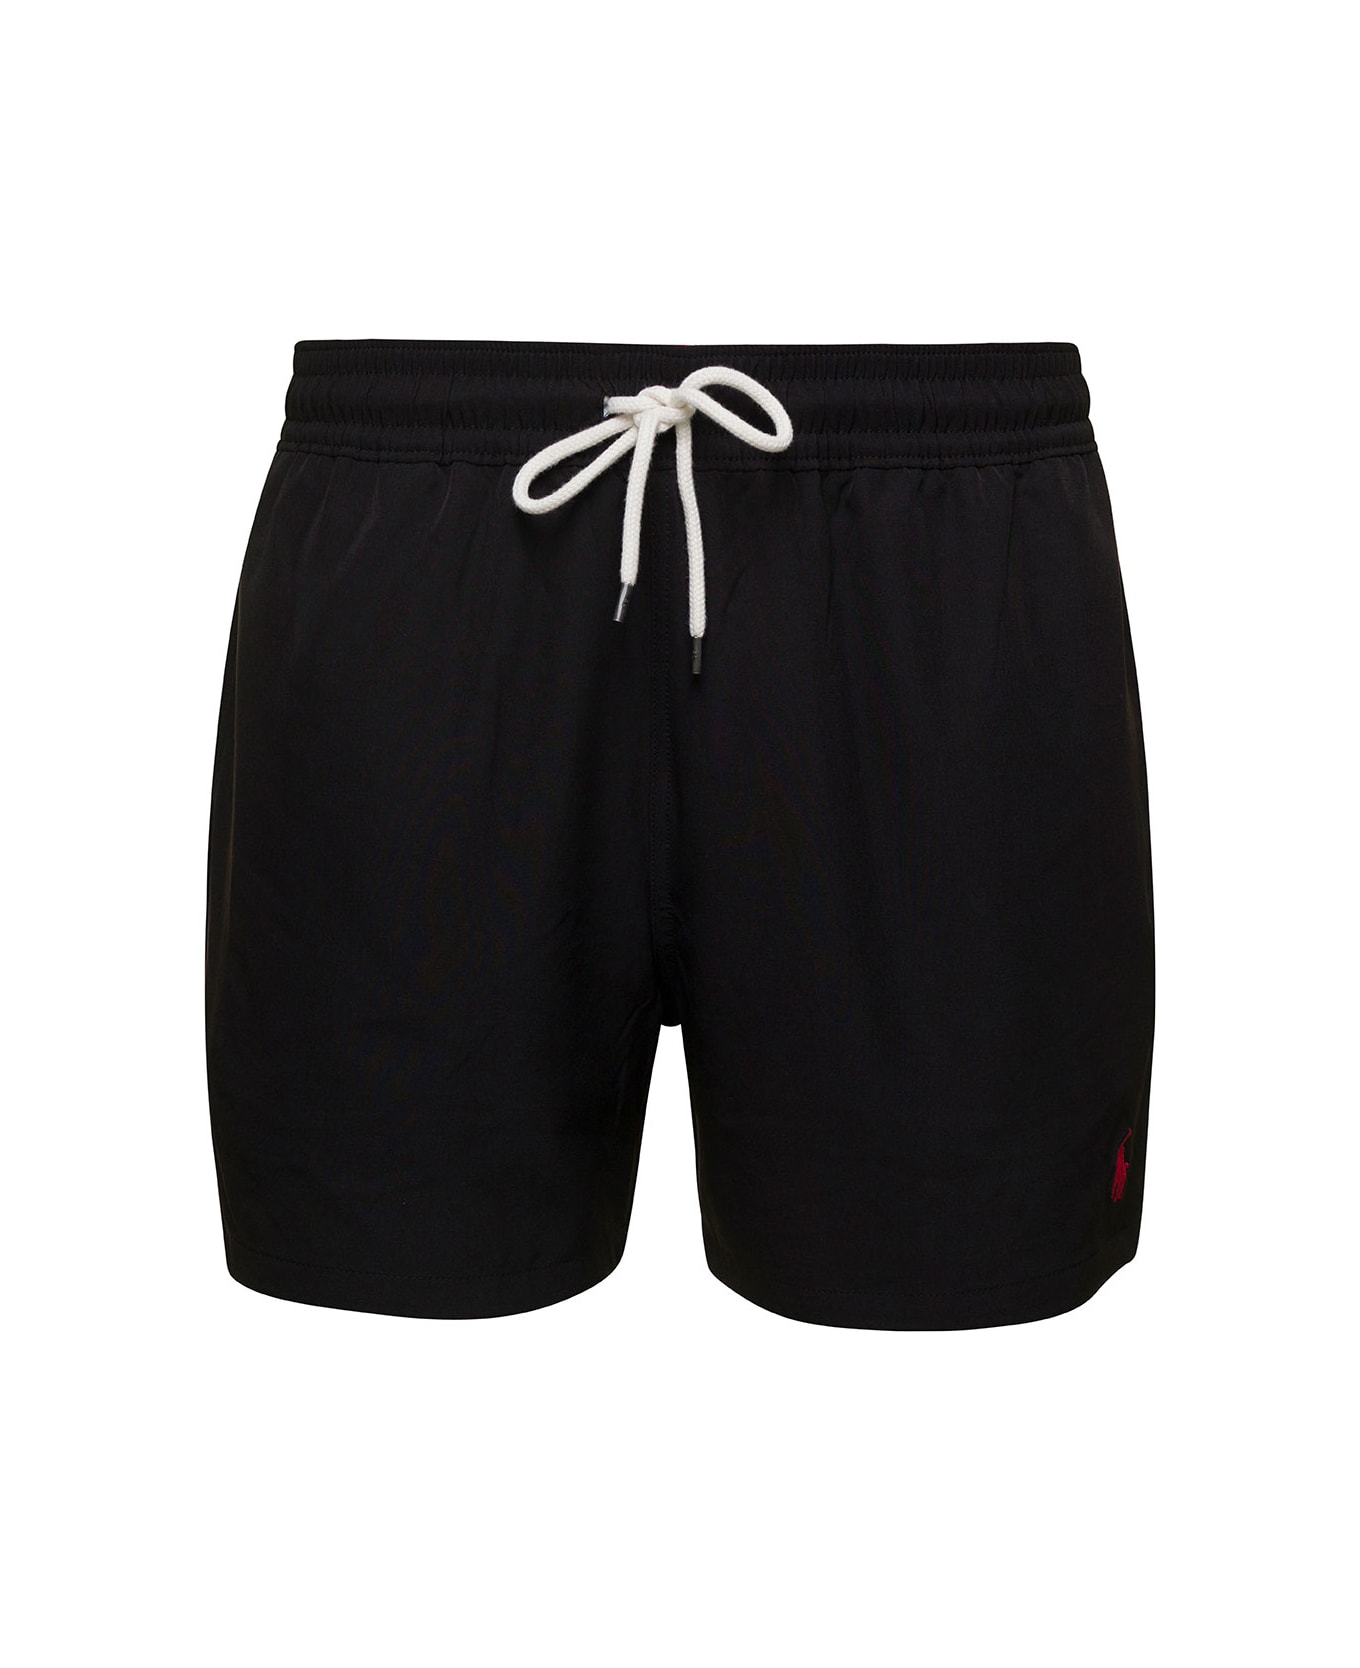 Ralph Lauren Black Swim Trunks With Embroidered Logo And Logo Patch In Nylon Man - BLACK